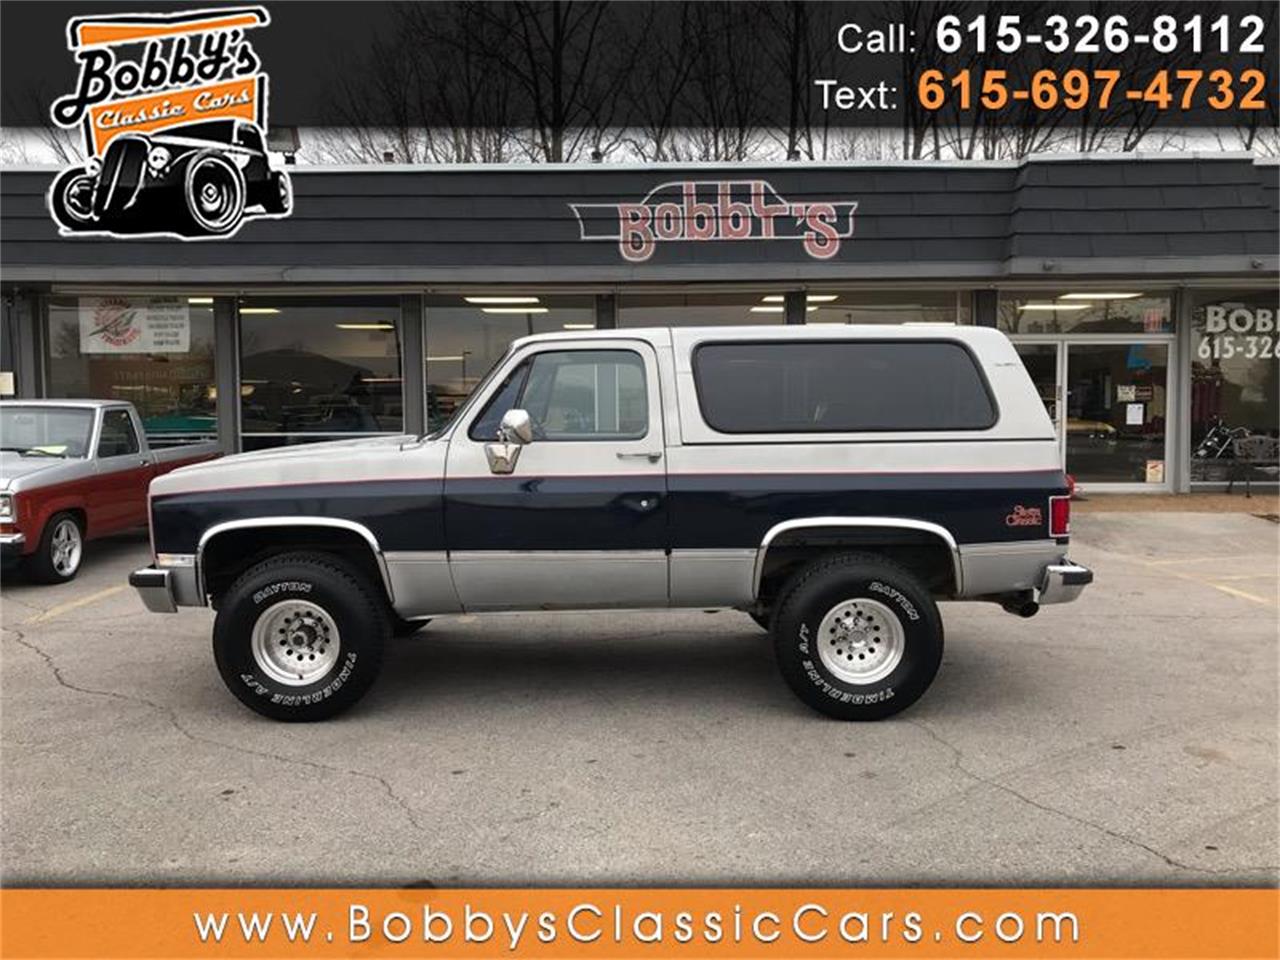 1987 GMC Jimmy for sale in Dickson, TN